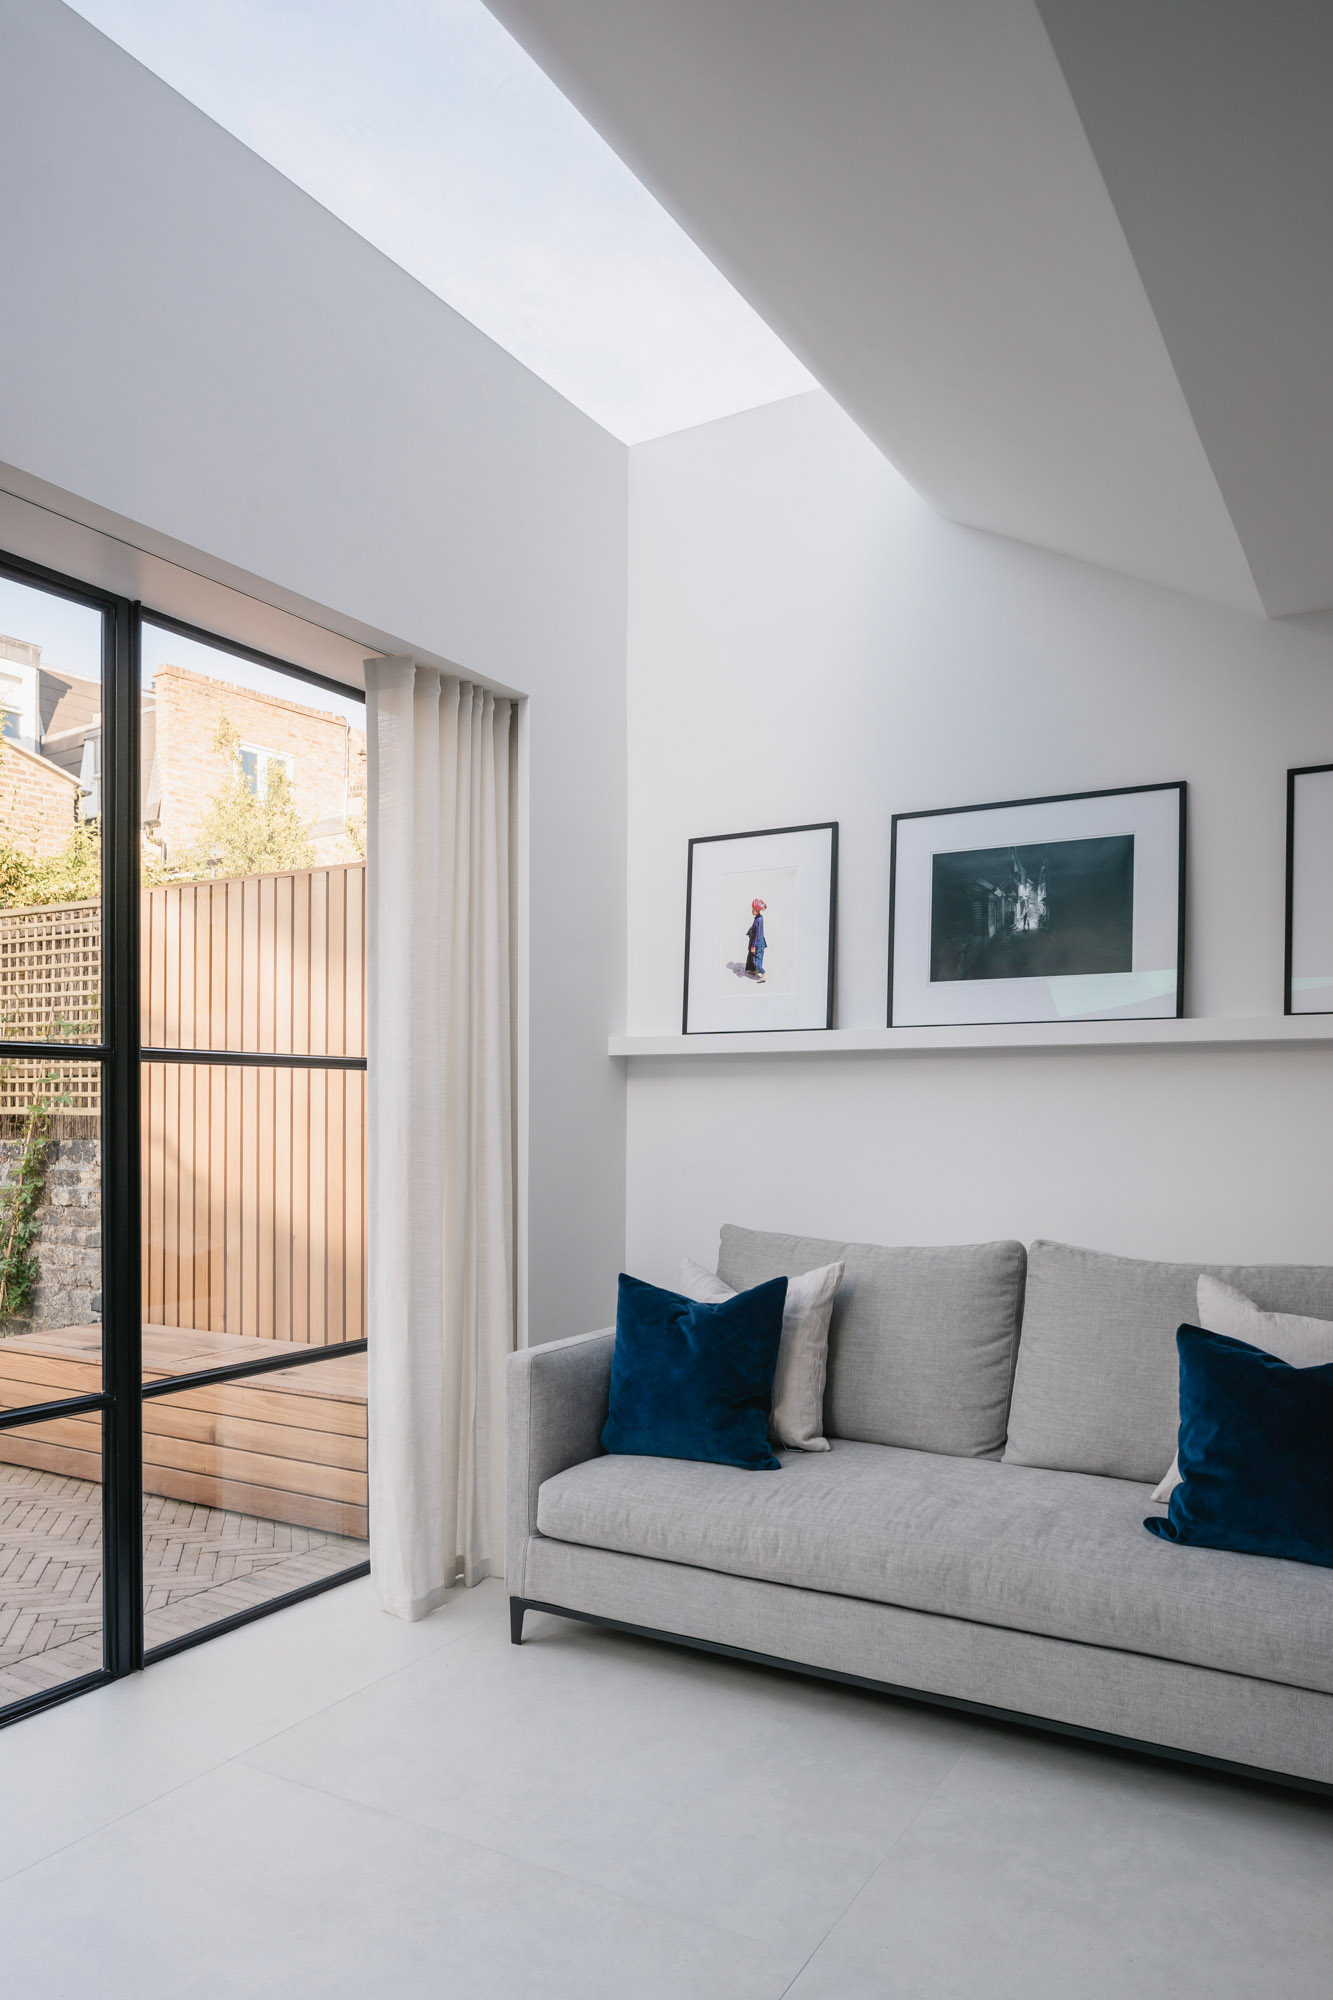 </p> <p>Find your ideal home design pro on designfor-me.com - get matched and see who's interested in your home project. Click image to see more inspiration from our design pros</p> <p>Design by Oliver, architect from Wandsworth, London</p> <p>#architecture #homedesign #modernhomes #homeinspiration #extensions #extensiondesign #extensioninspiration #extensionideas #houseextension #minimalistarchitecture #minimalistdecor #minimalistdesign #miminalism #glazing #architecturalglazing #naturallight #skylights #rooflights </p> <p>